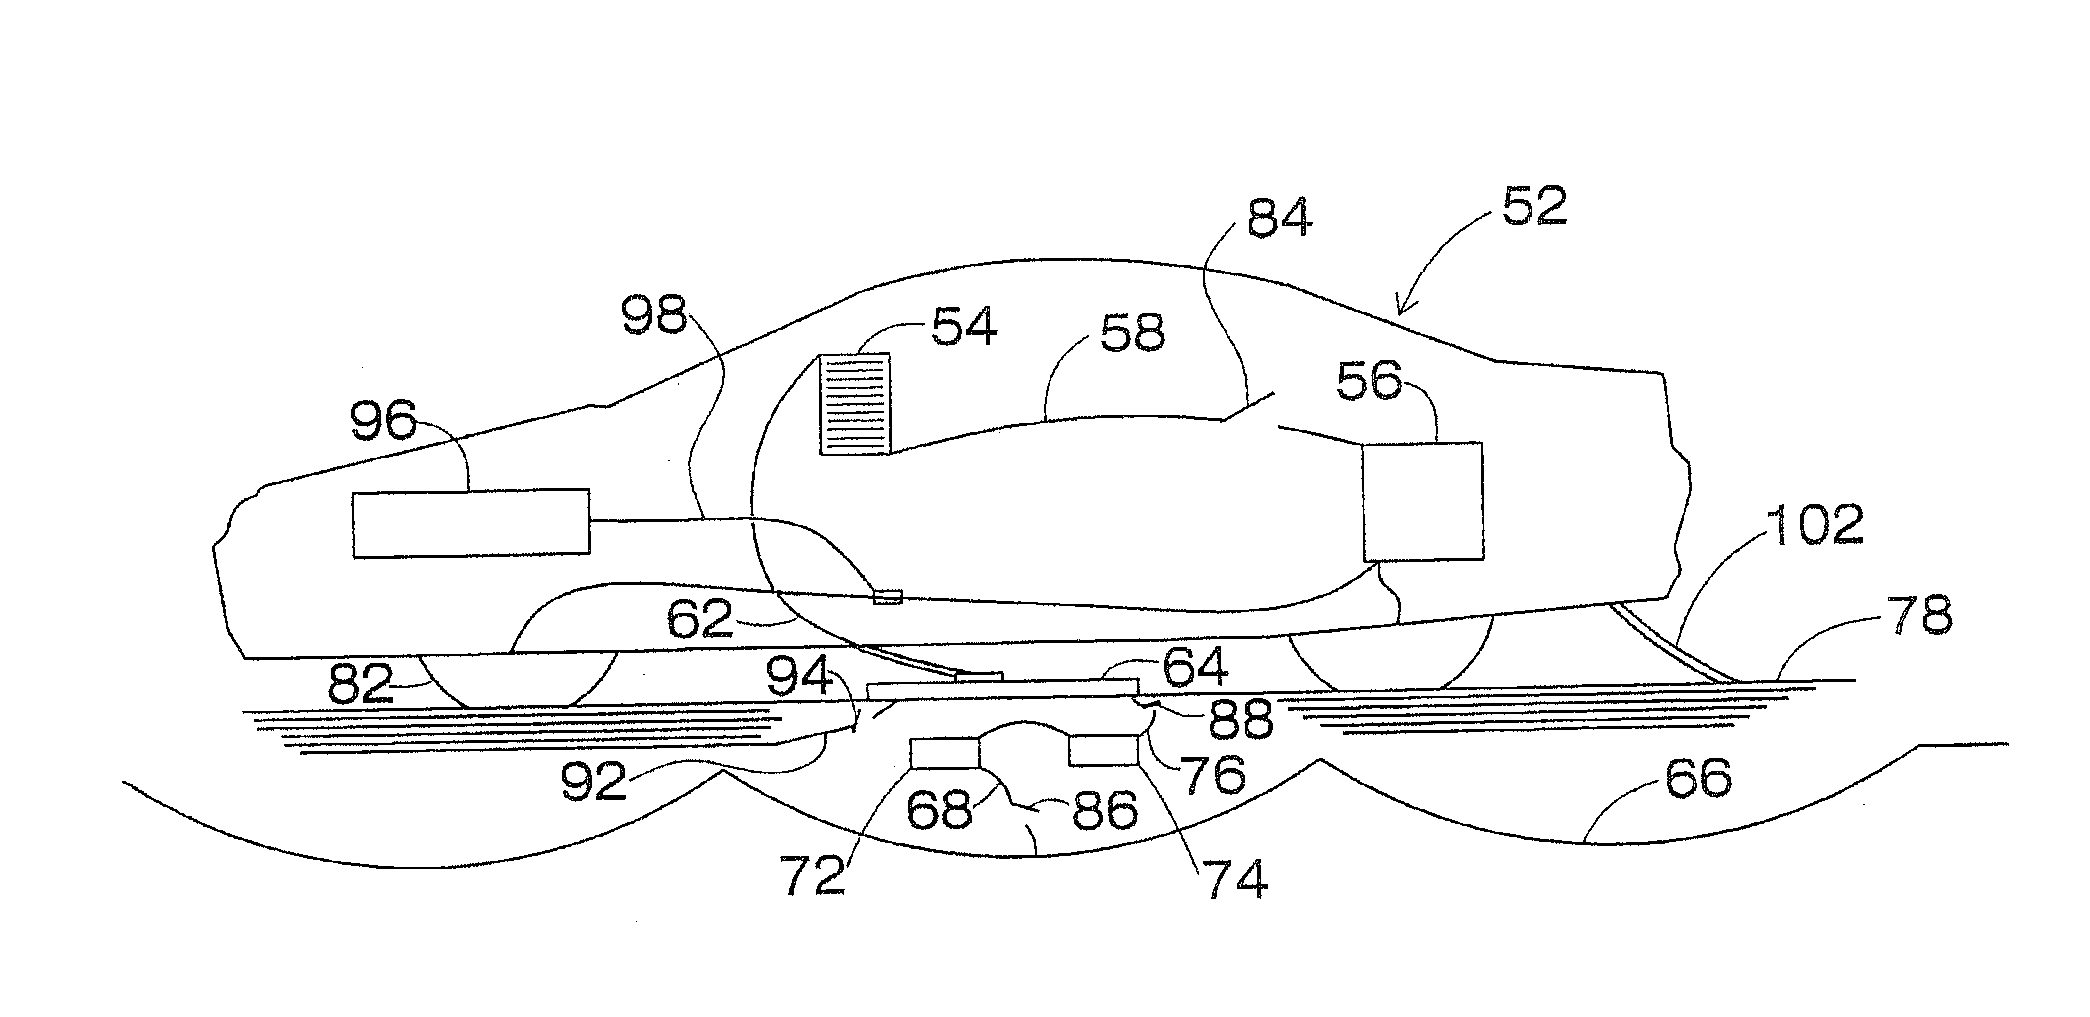 Apparatus for pulse charging electric vehicles